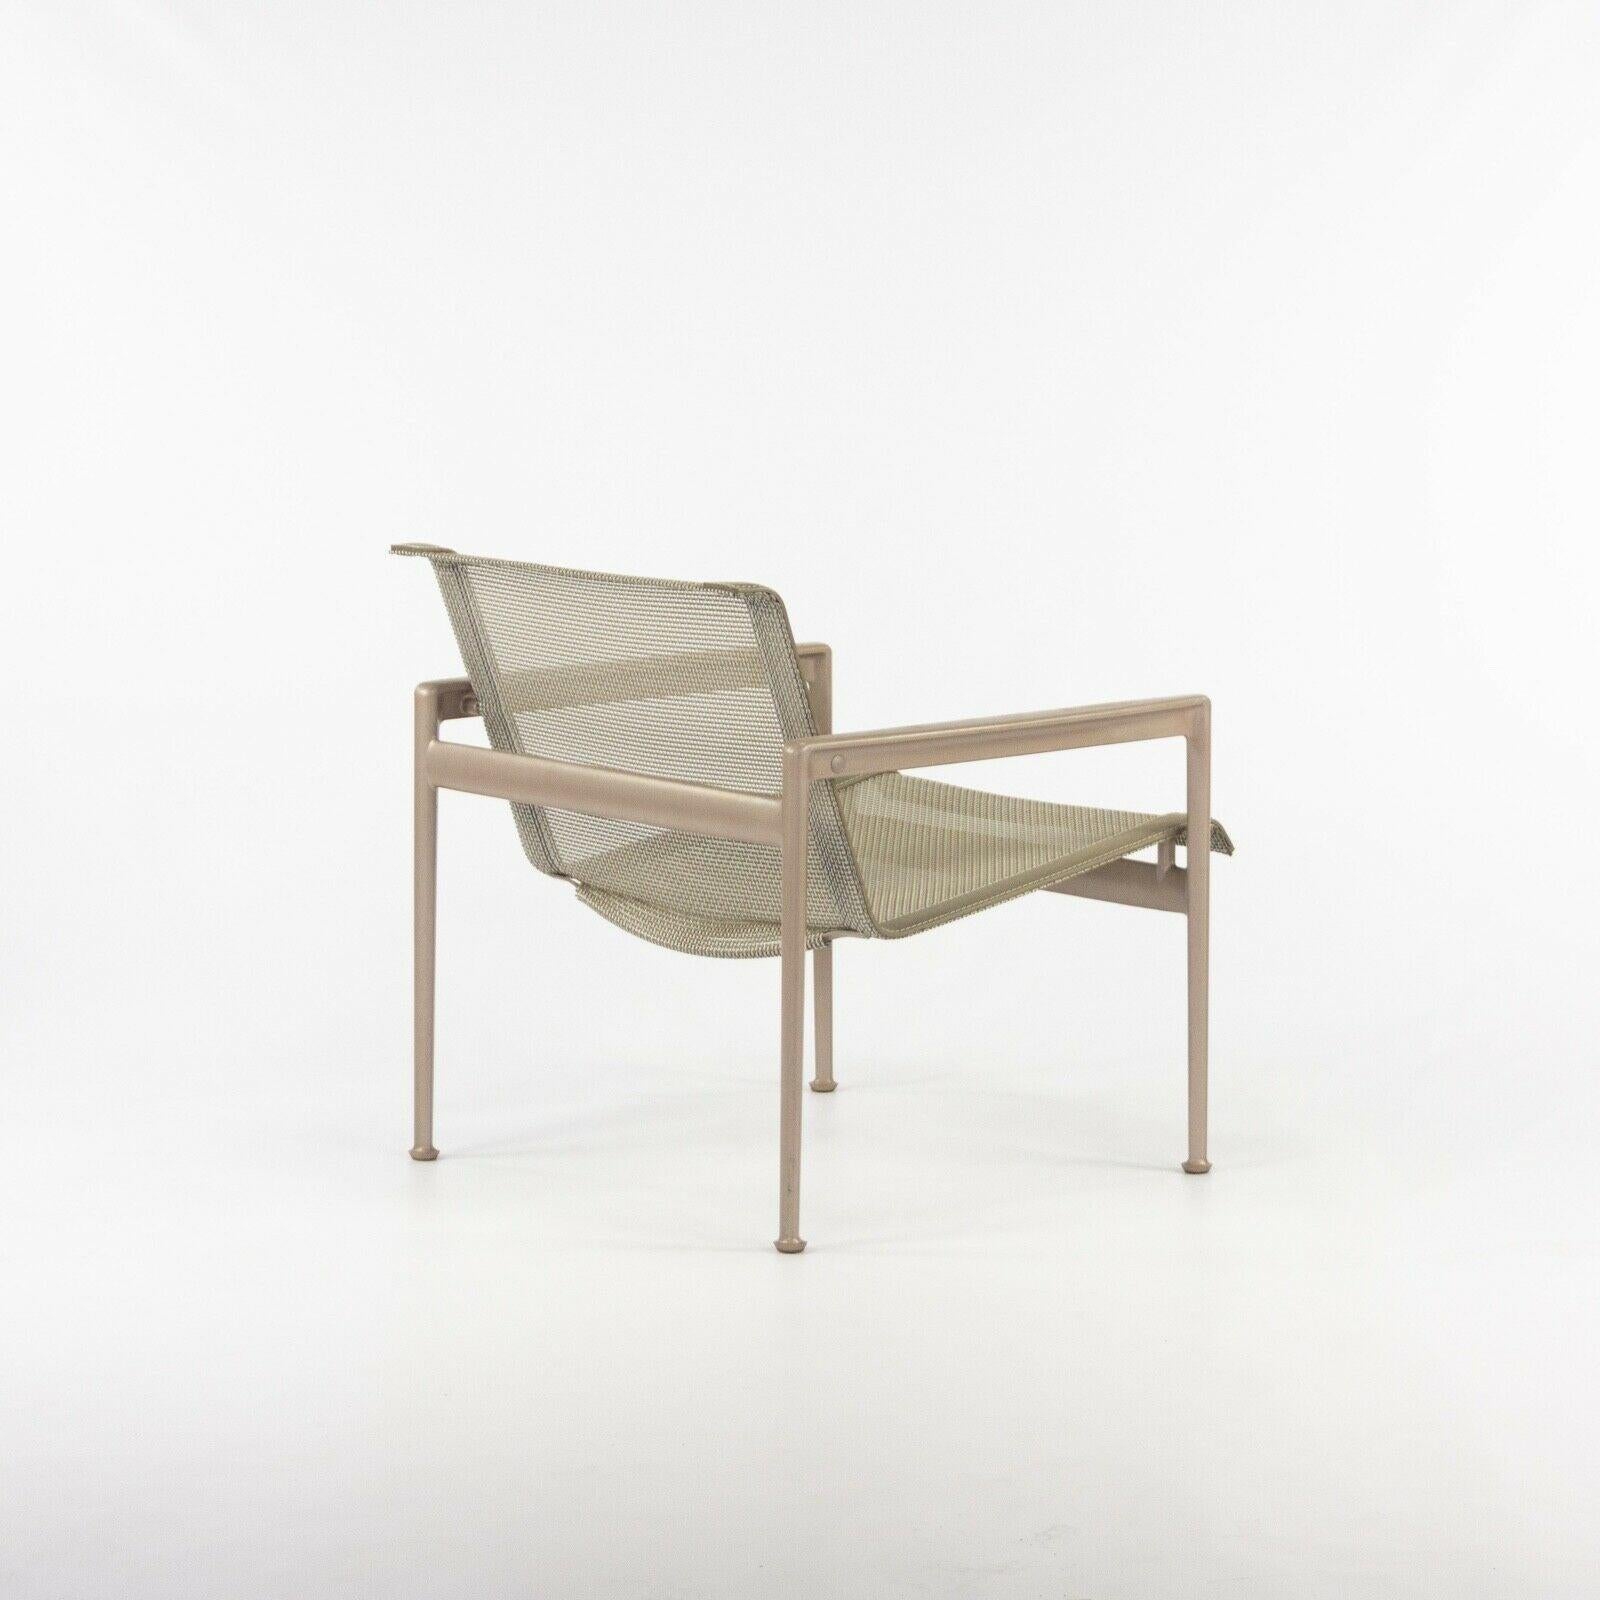 2020 Knoll Richard Schultz 1966 Series Outdoor Lounge Chair w/ Arm & Beige Frame In Good Condition For Sale In Philadelphia, PA